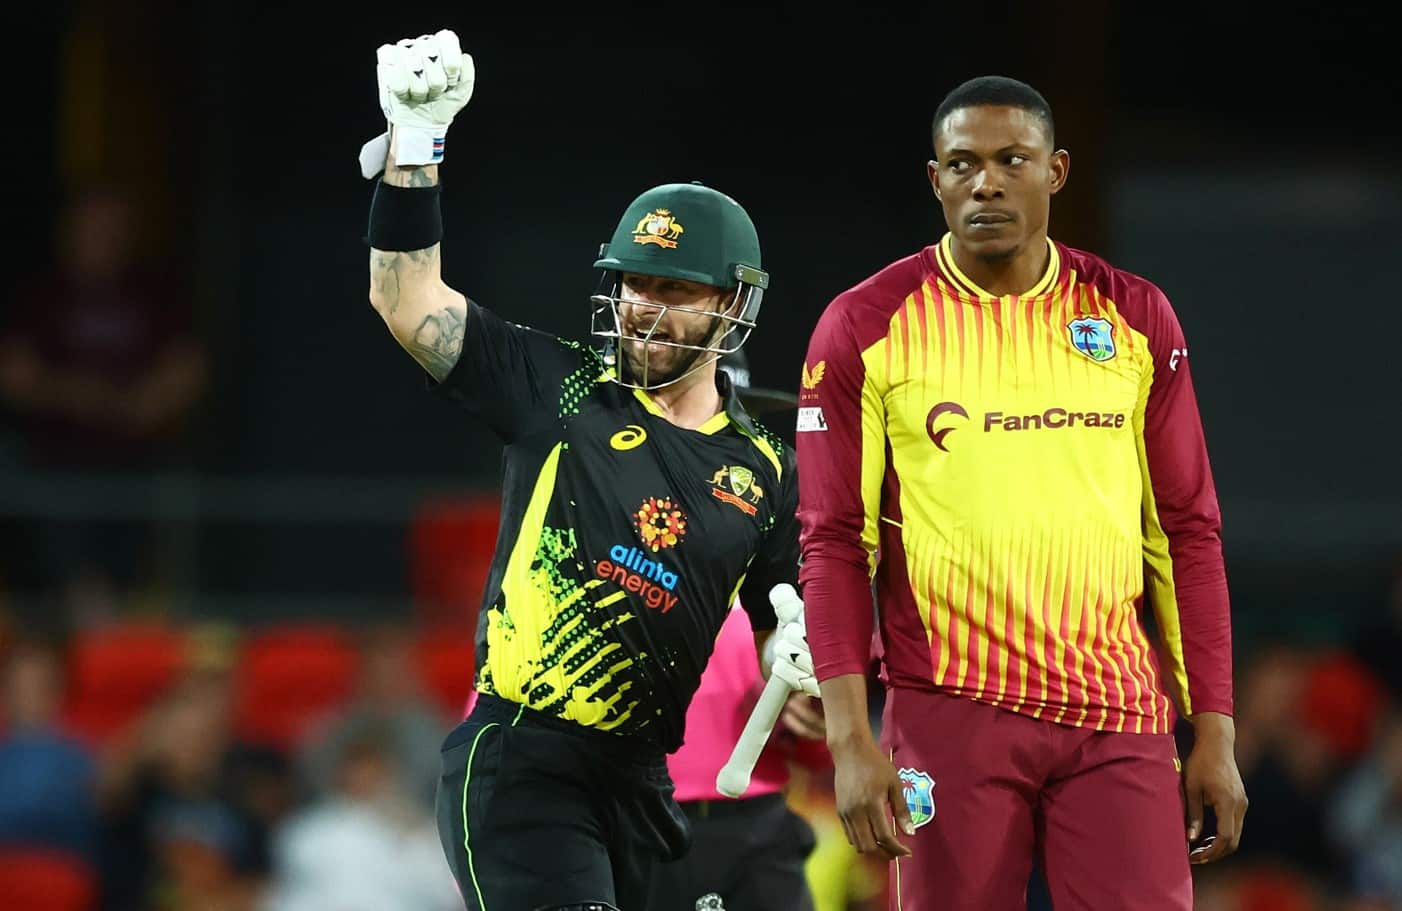 AUS vs WI 2022, 2nd T20I: Match Preview, Key Players, Cricket Exchange Fantasy Tips
